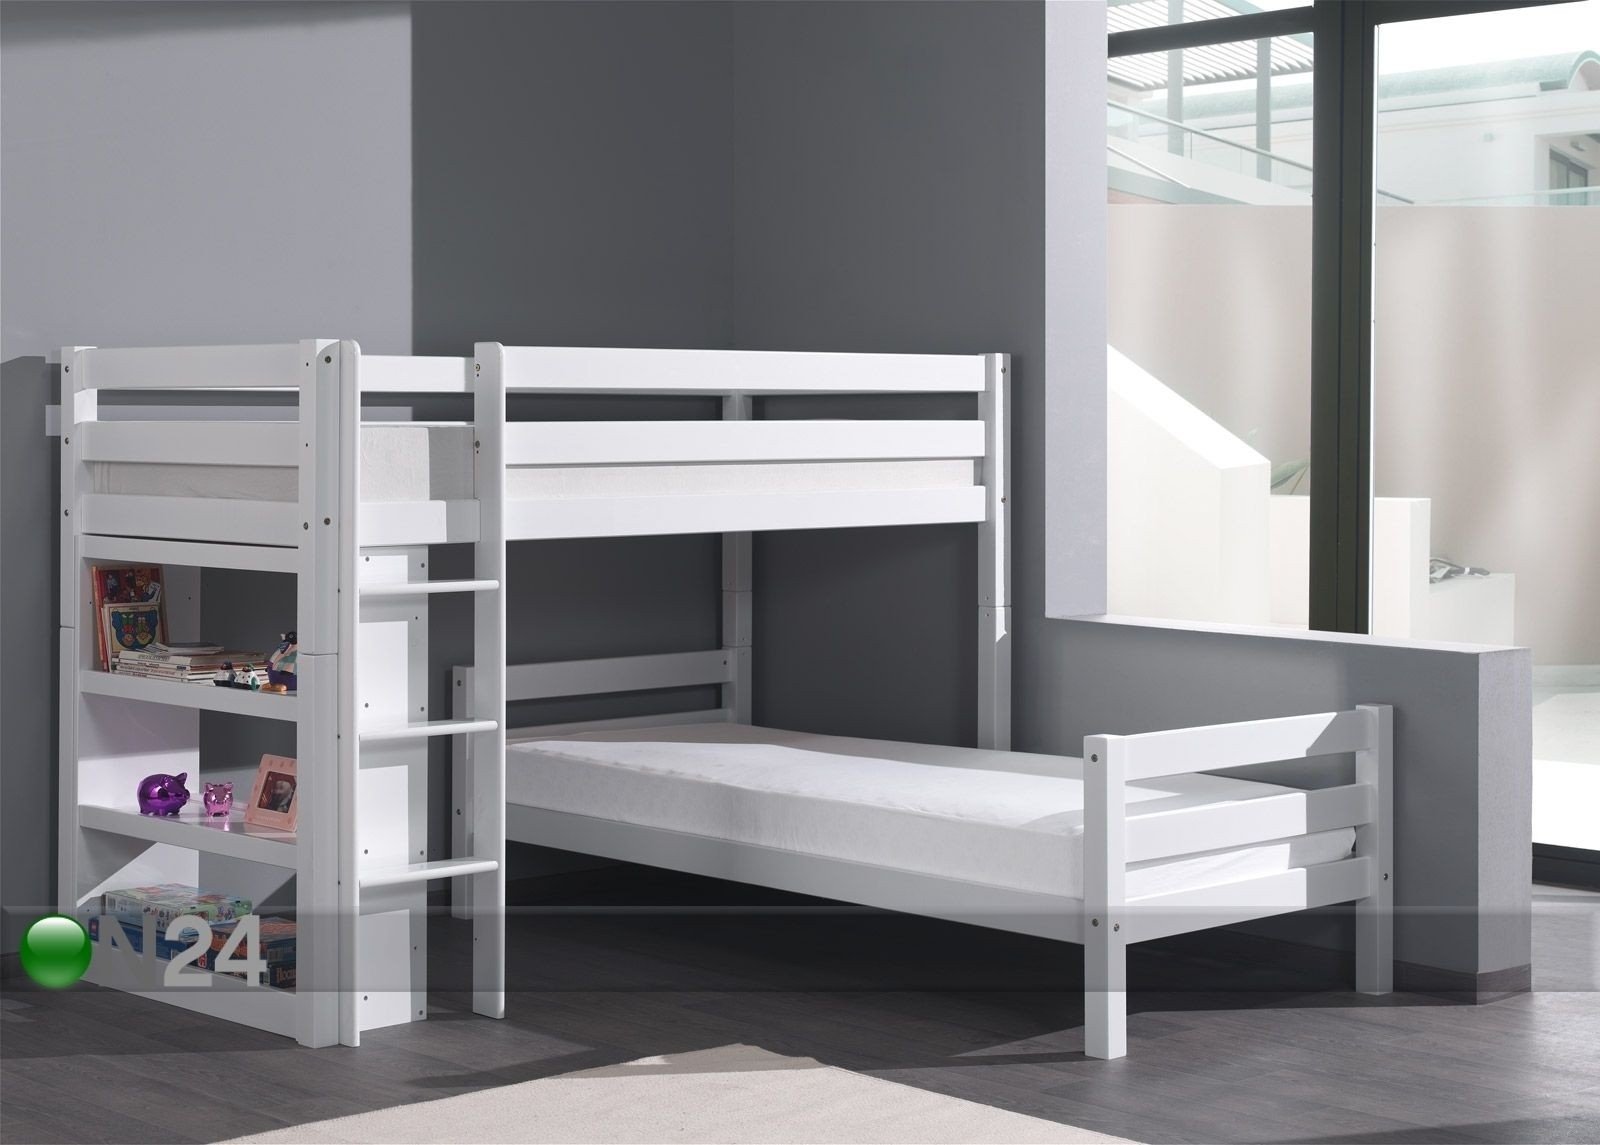 beds and bunks